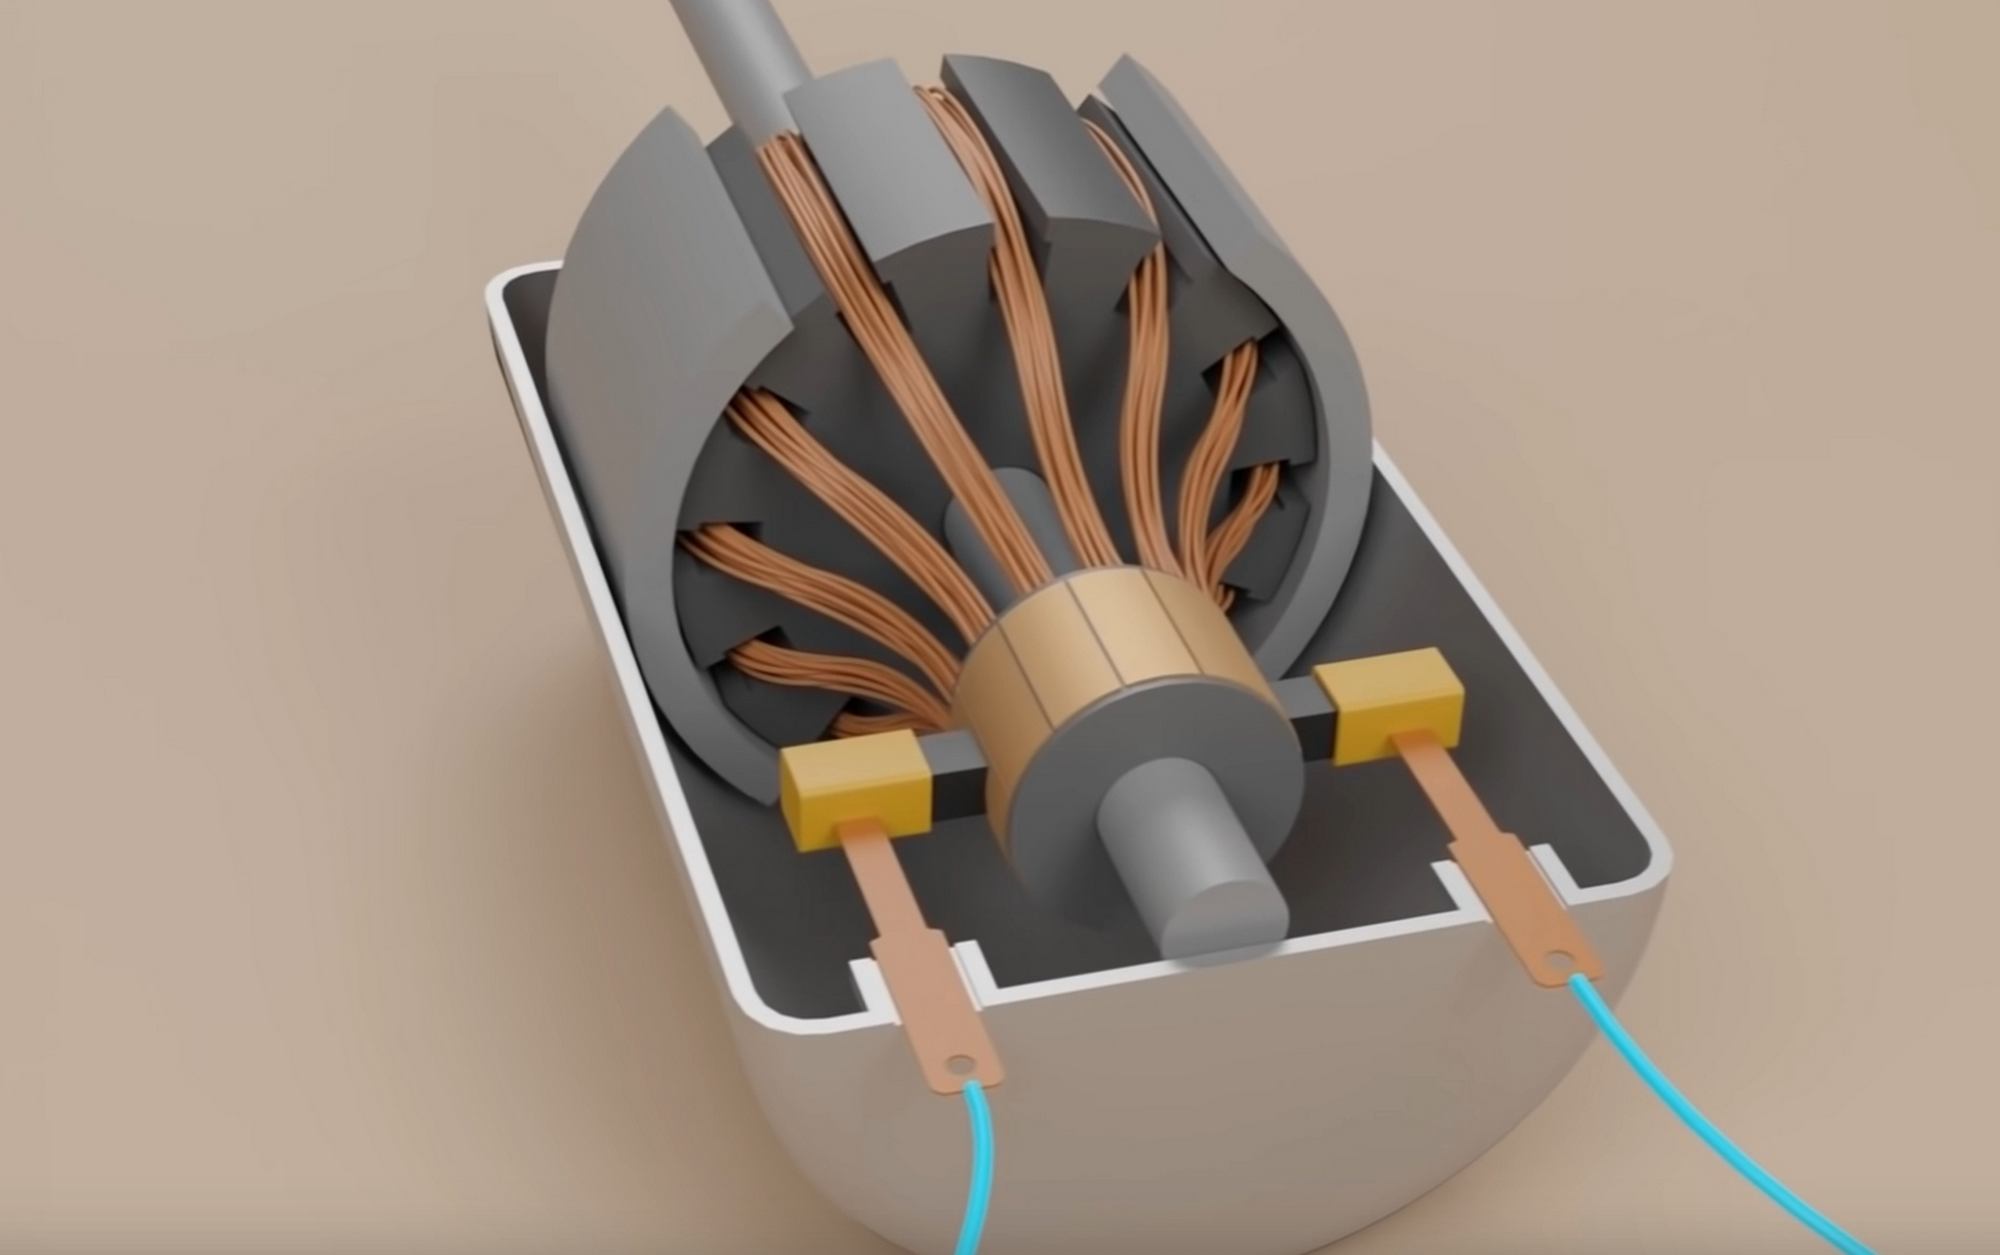 How does an Electric Motor work? | WordlessTech